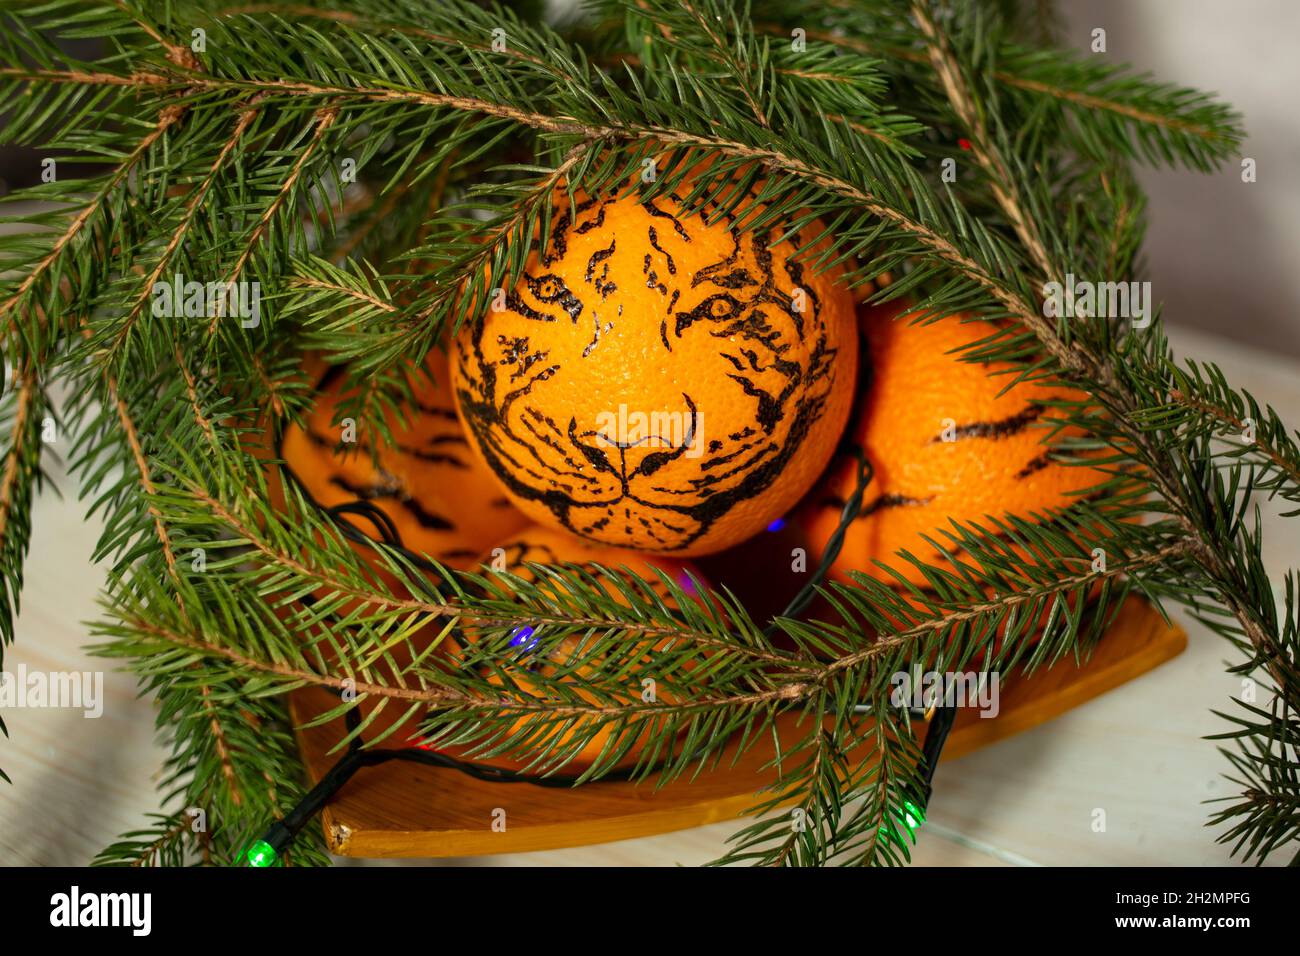 orange painted with black stipes looking like a tiger stalking it's prey from under fir tree branches (Asian Christmas 2022 concept) Stock Photo